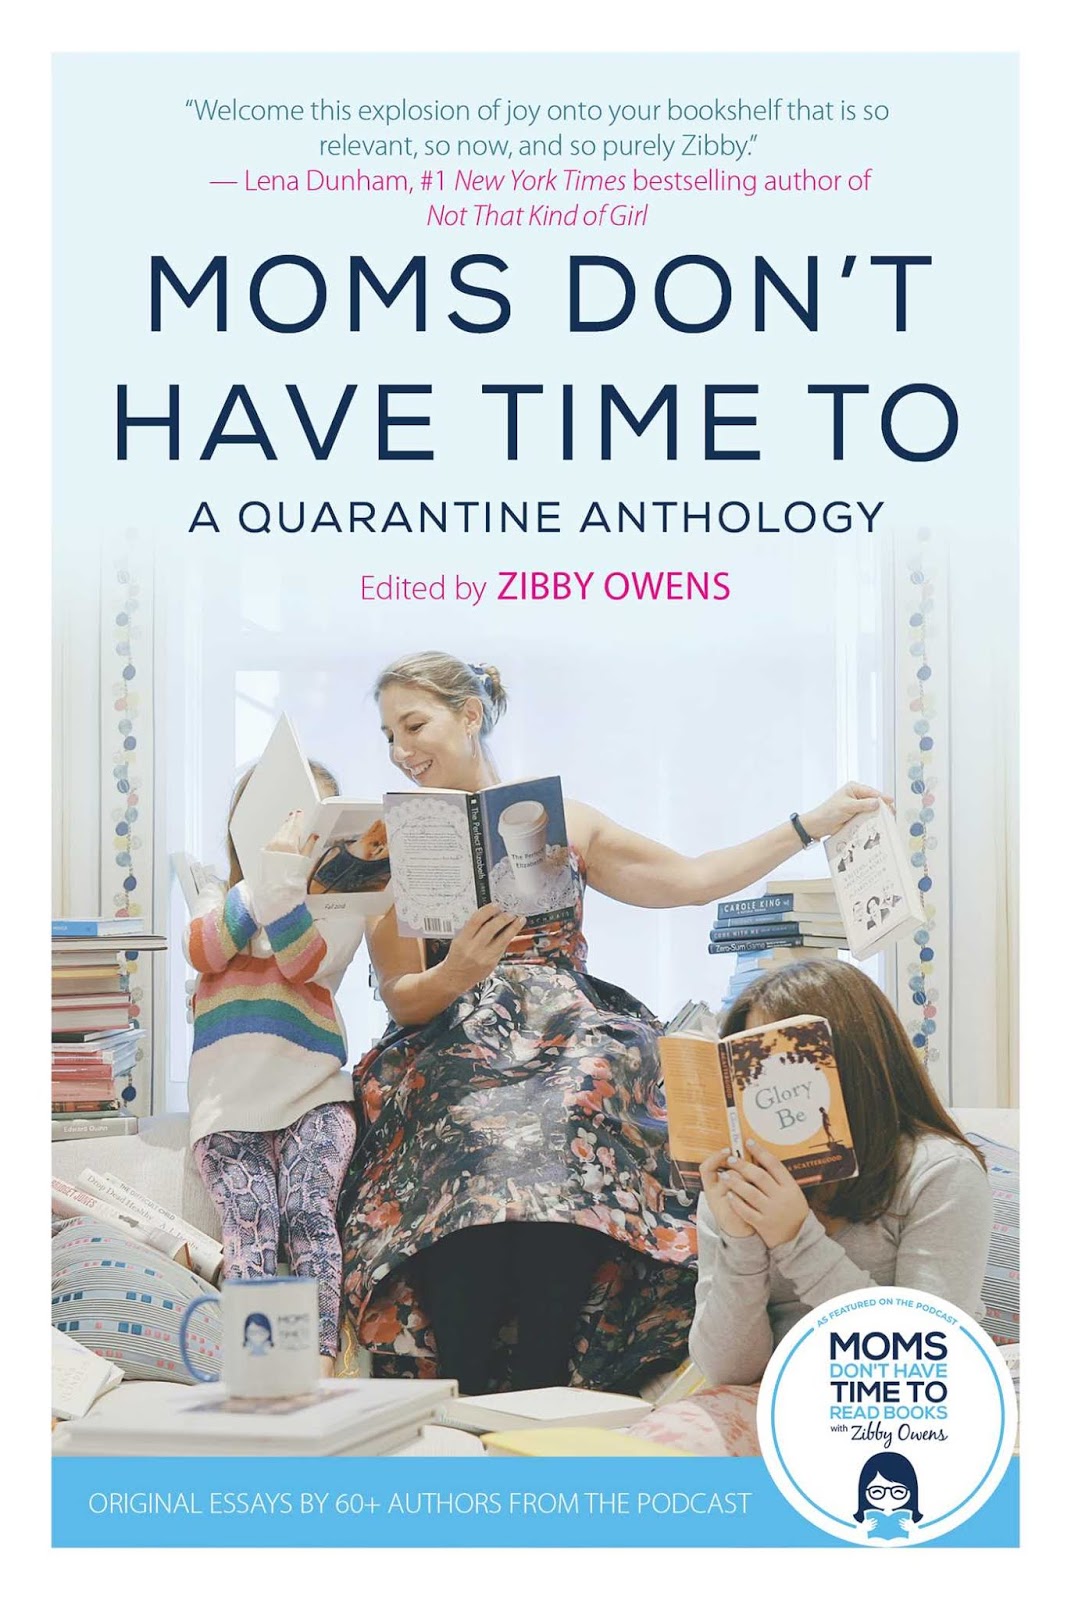 Review: Moms Don’t Have Time To: A Quarantine Anthology edited by Zibby Owens